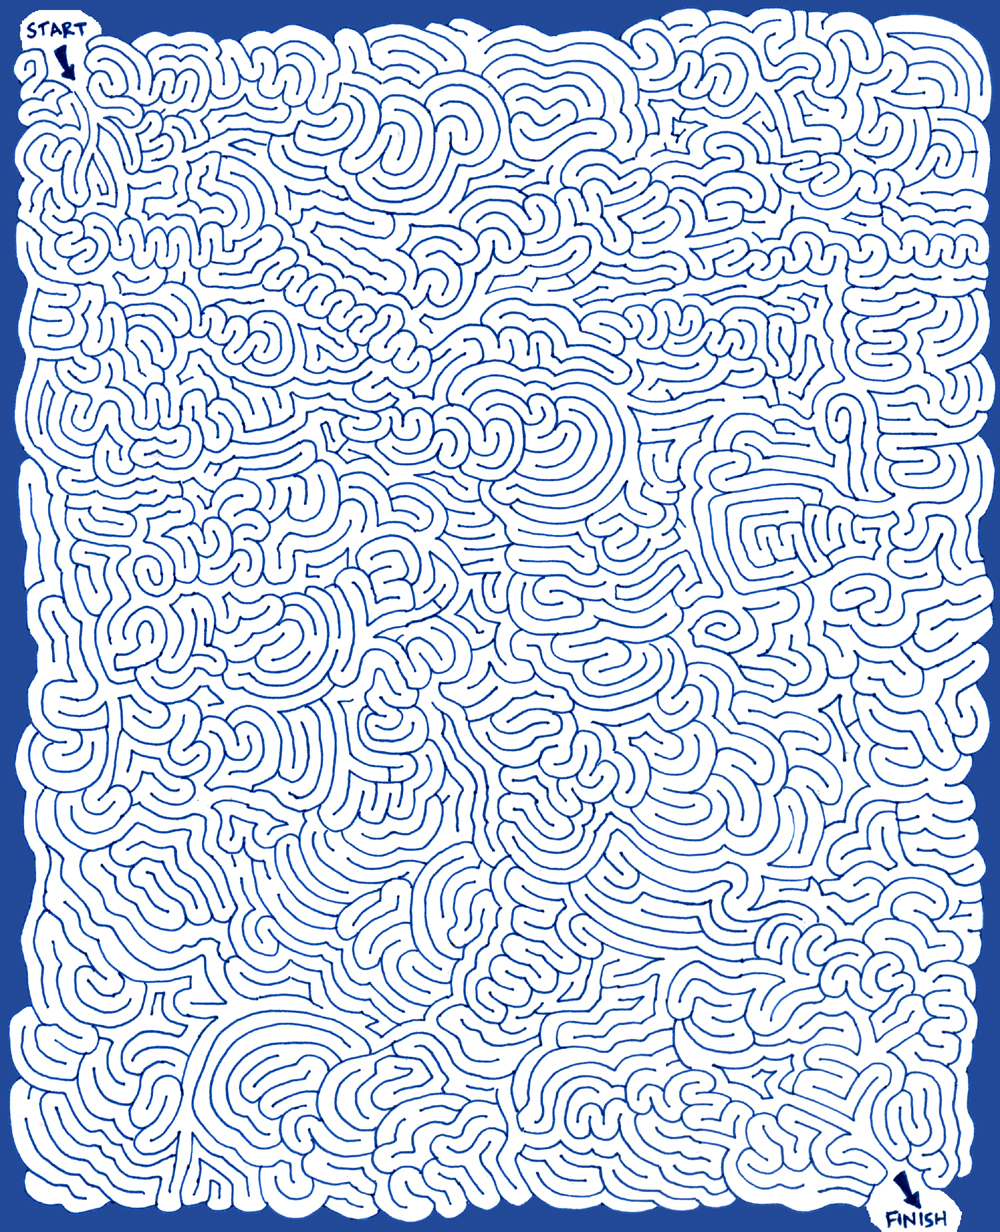 Another Maze...